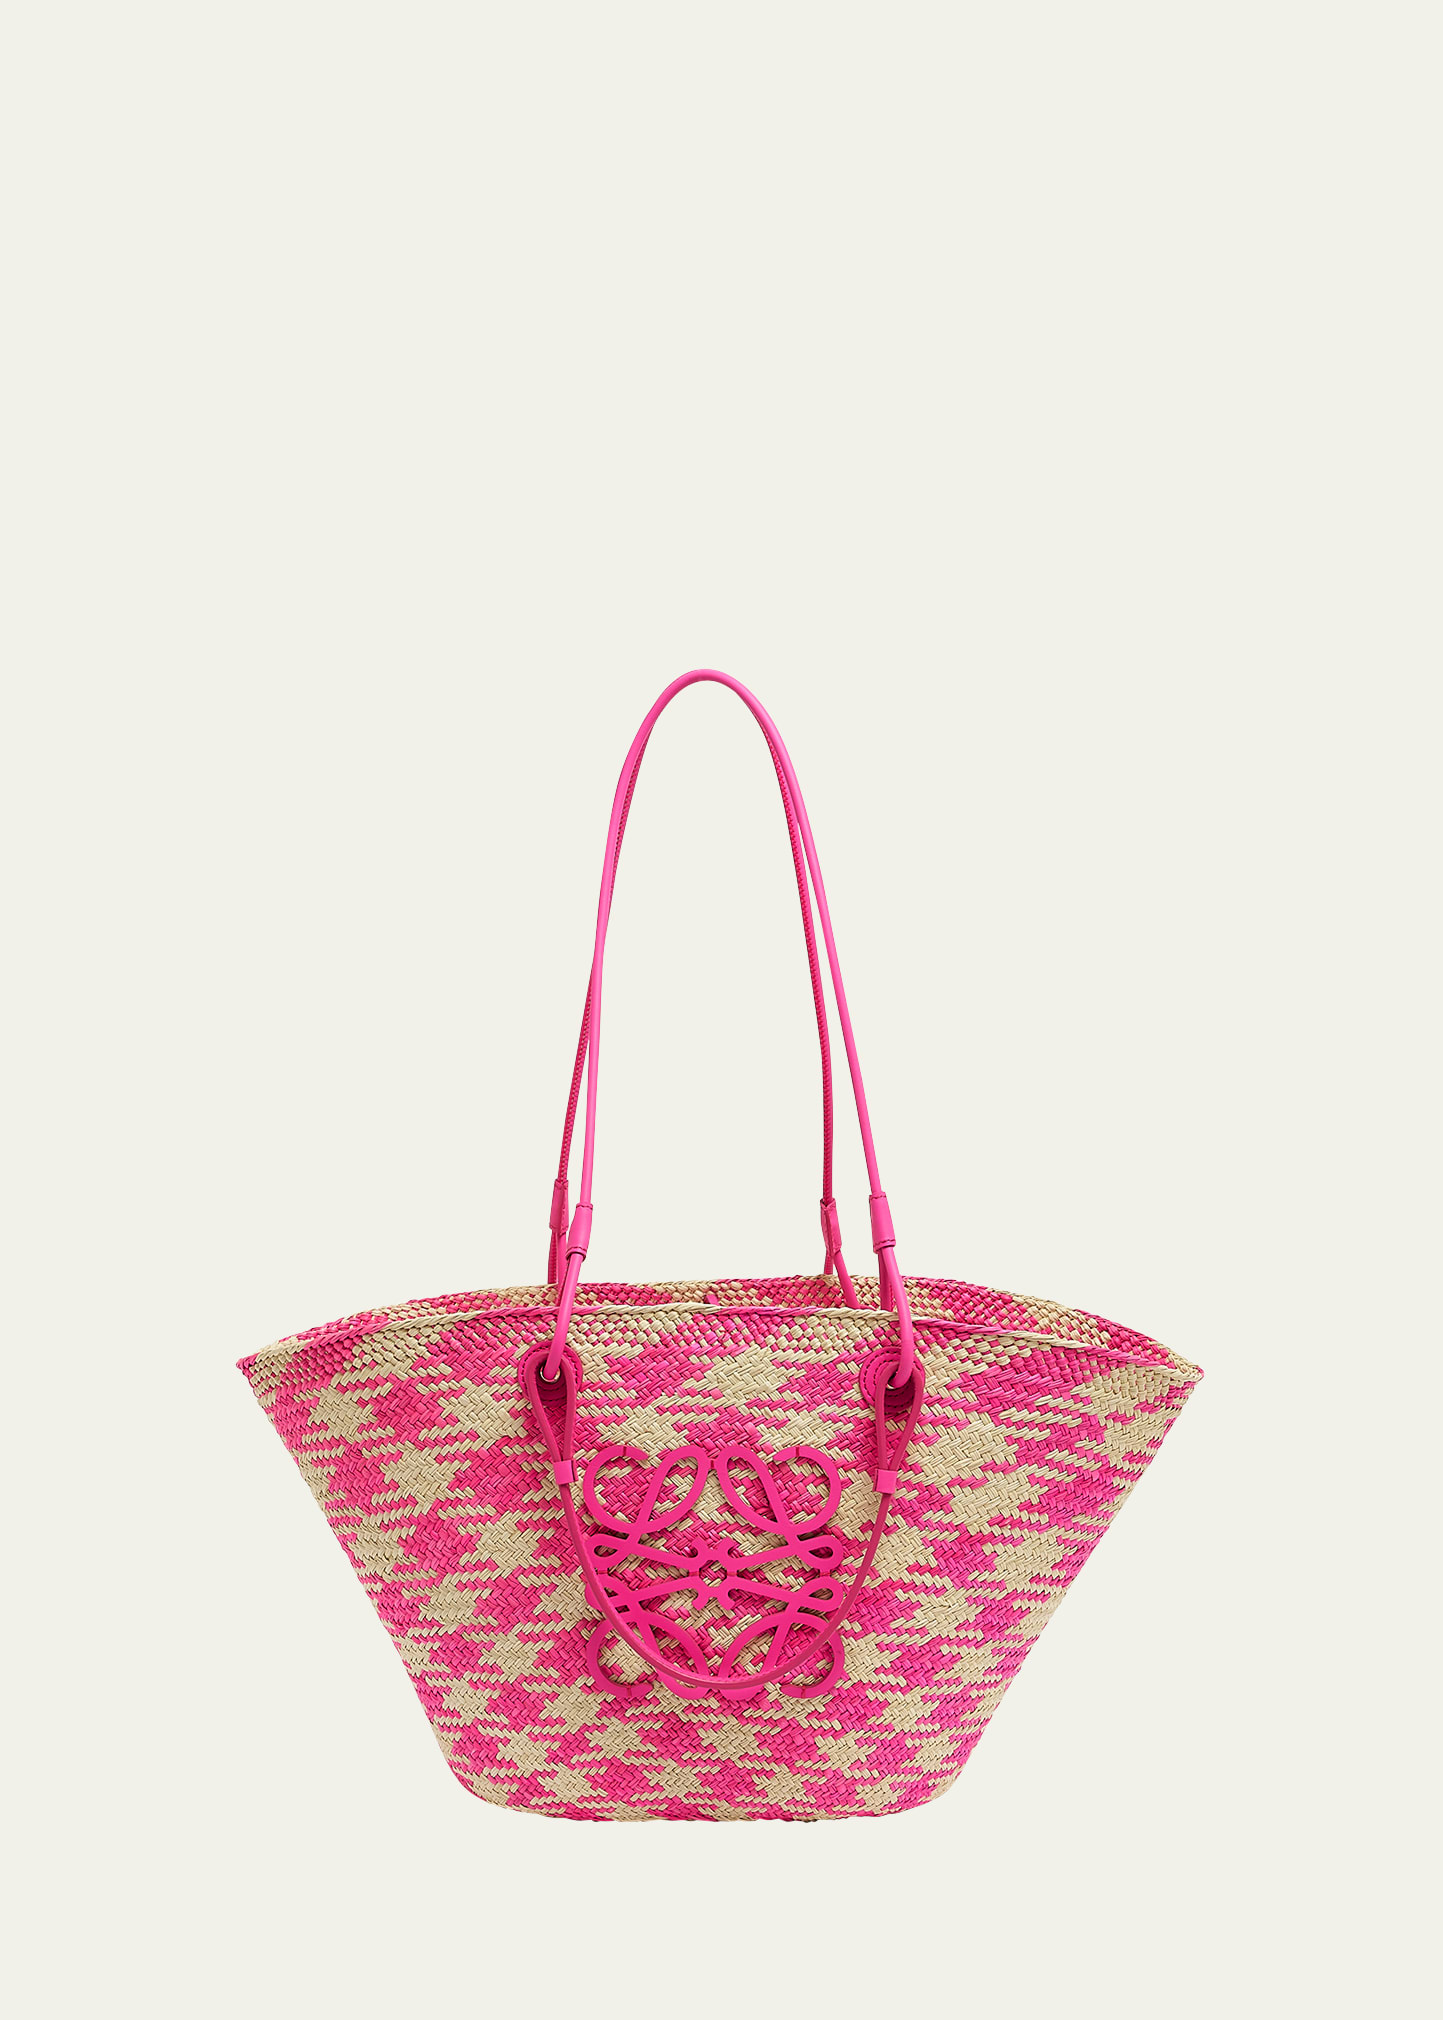 x Paula's Ibiza Medium Anagram Basket Tote Bag in Checkered Iraca Palm with Leather Handles